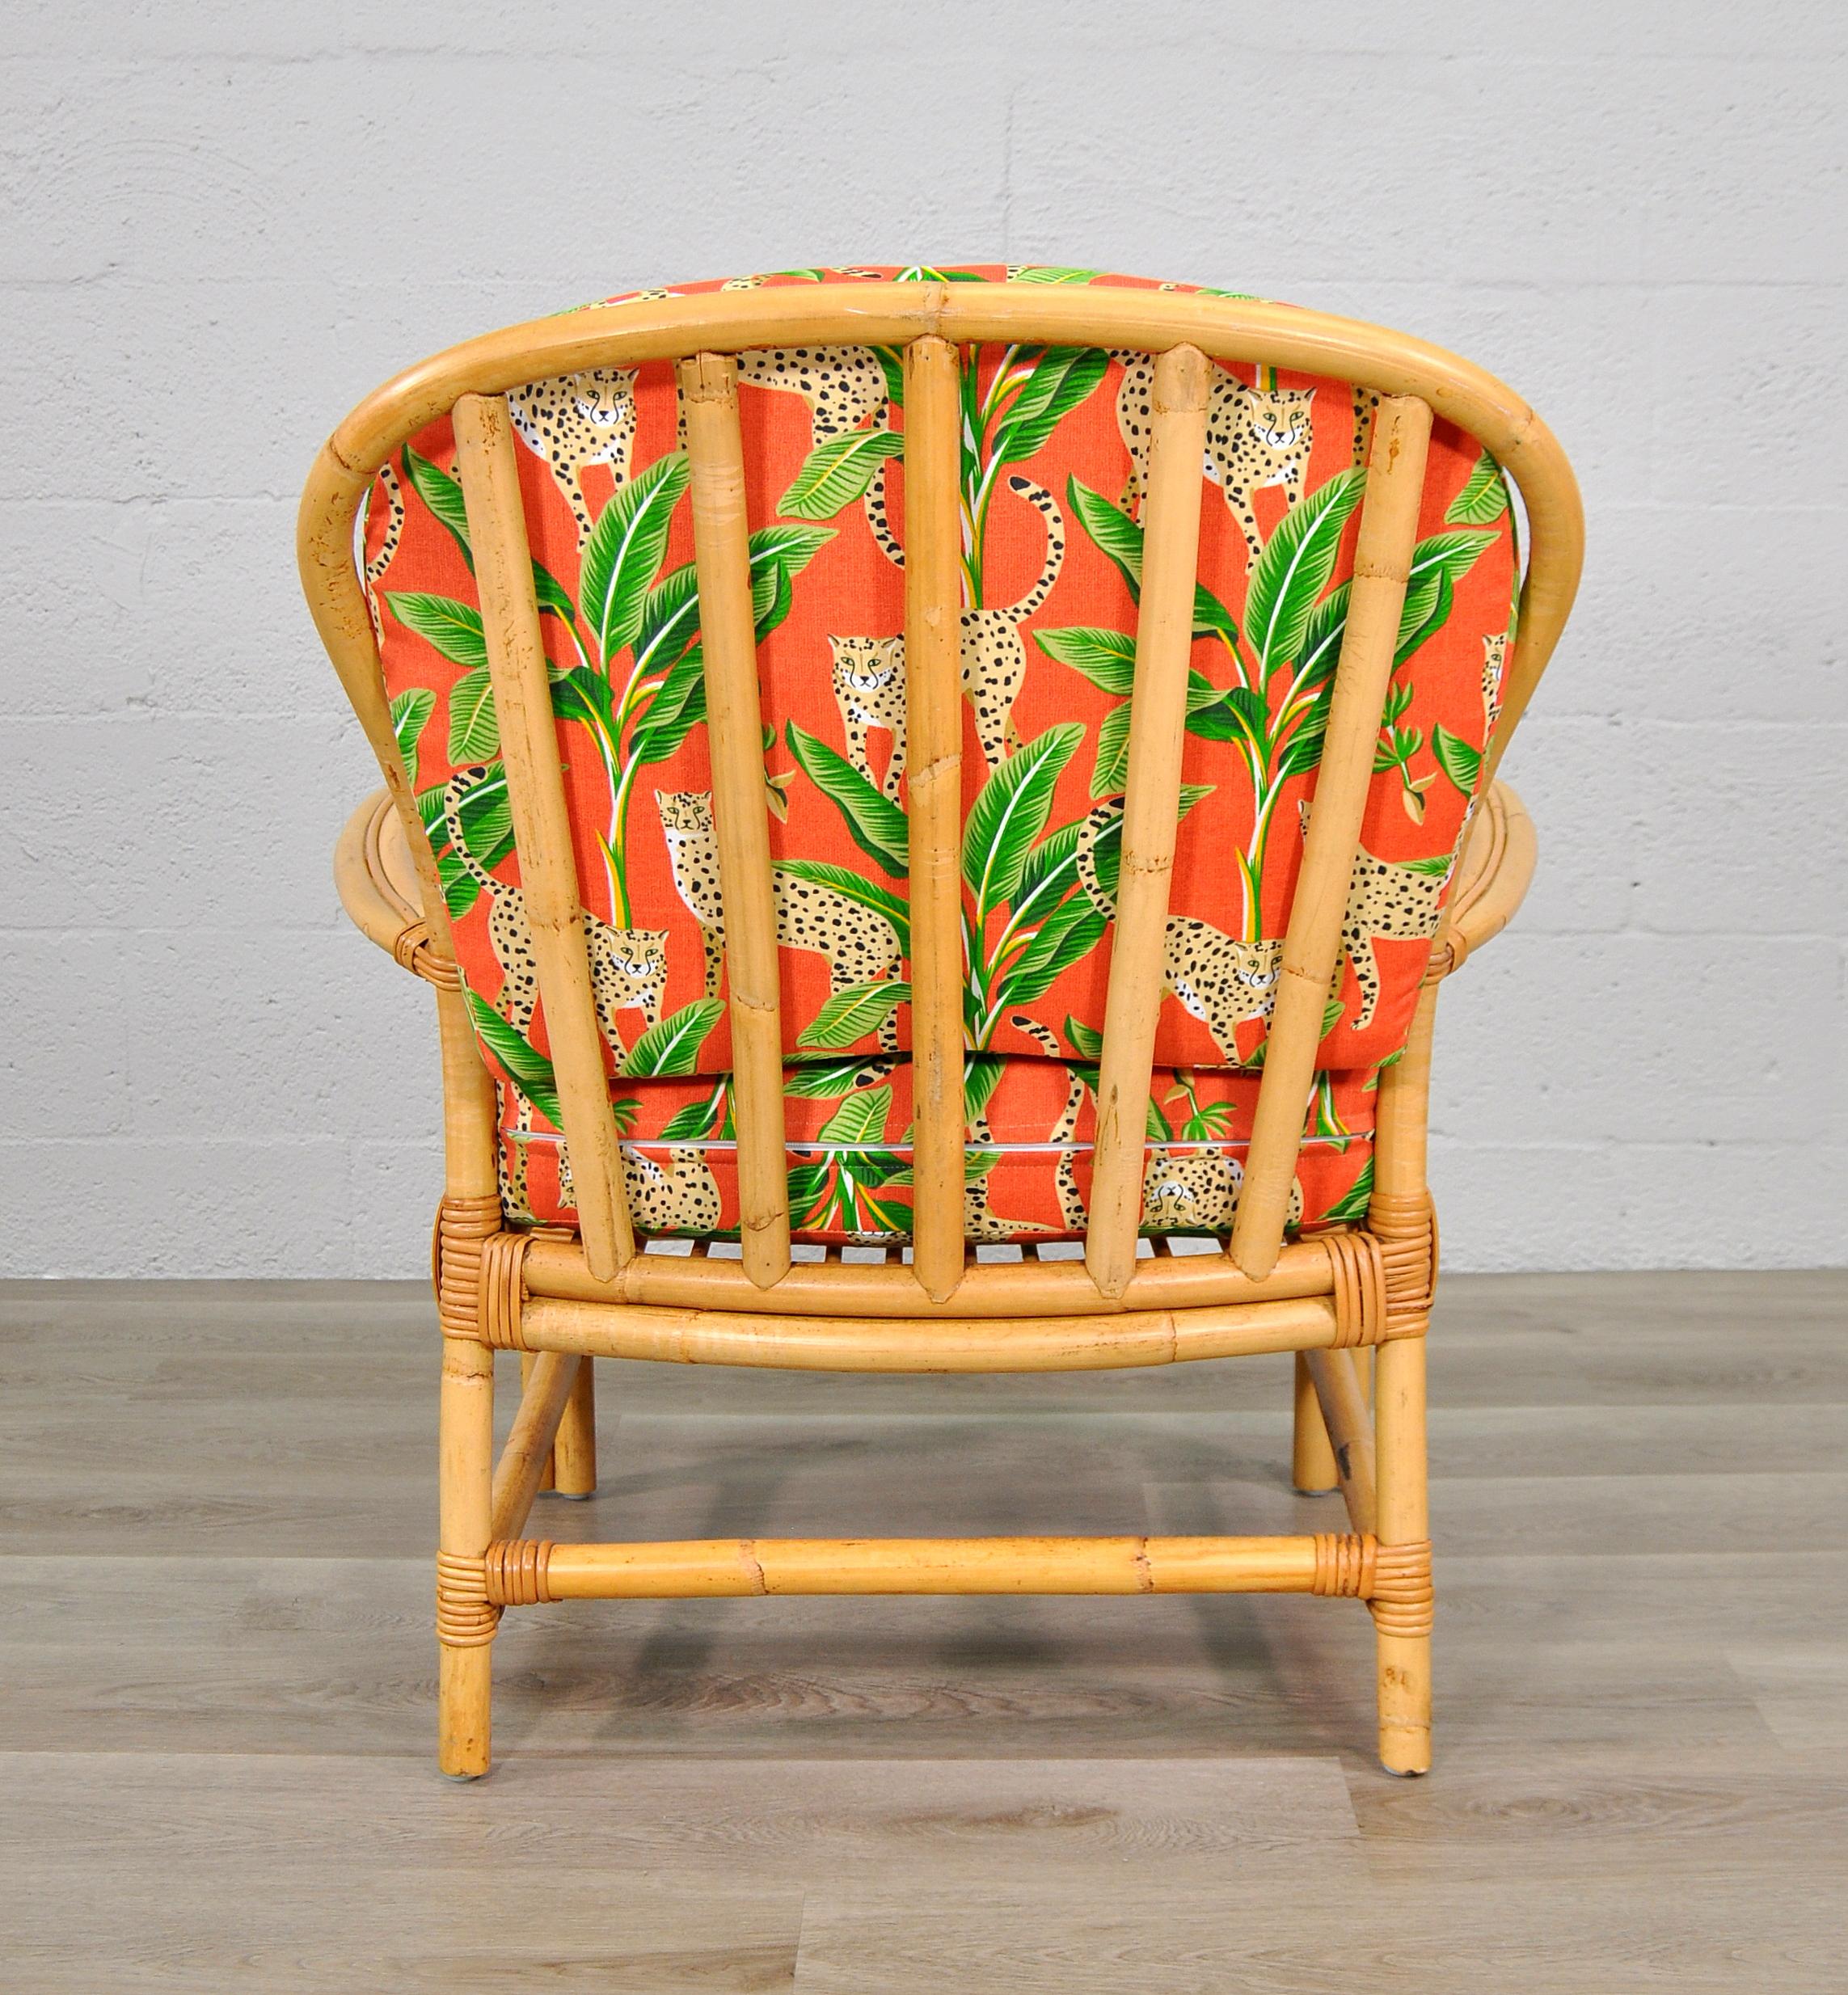 Mid-Century Modern Rattan Chair with Tropical Cheetah and Palm Fabric For Sale